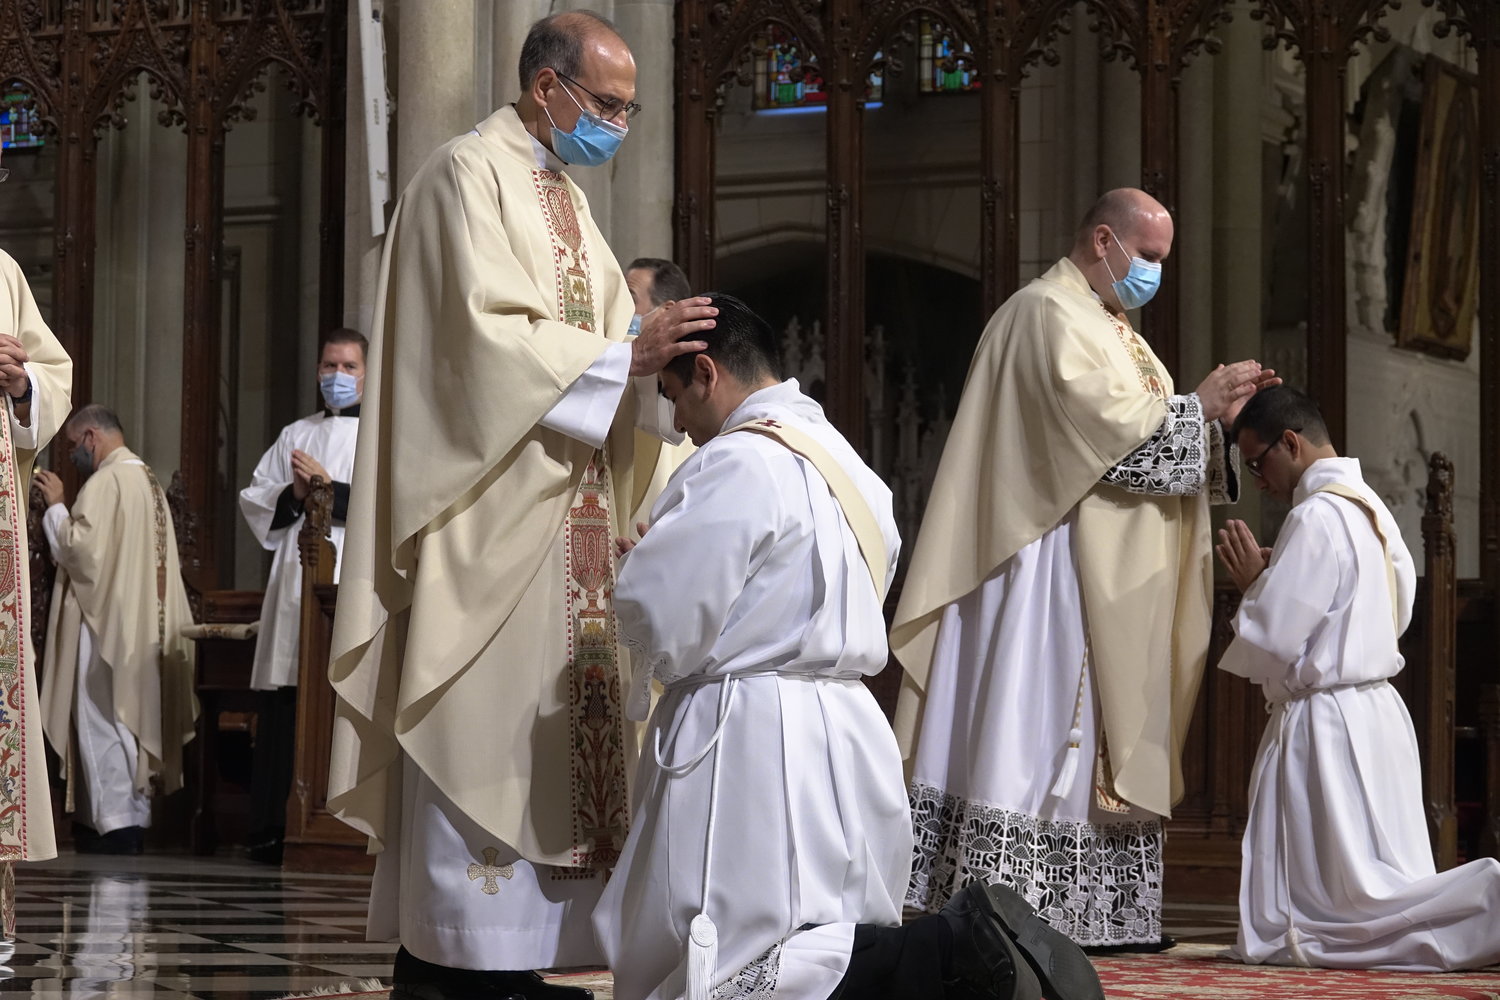 Priests lay hands on the heads of their new priestly brothers.